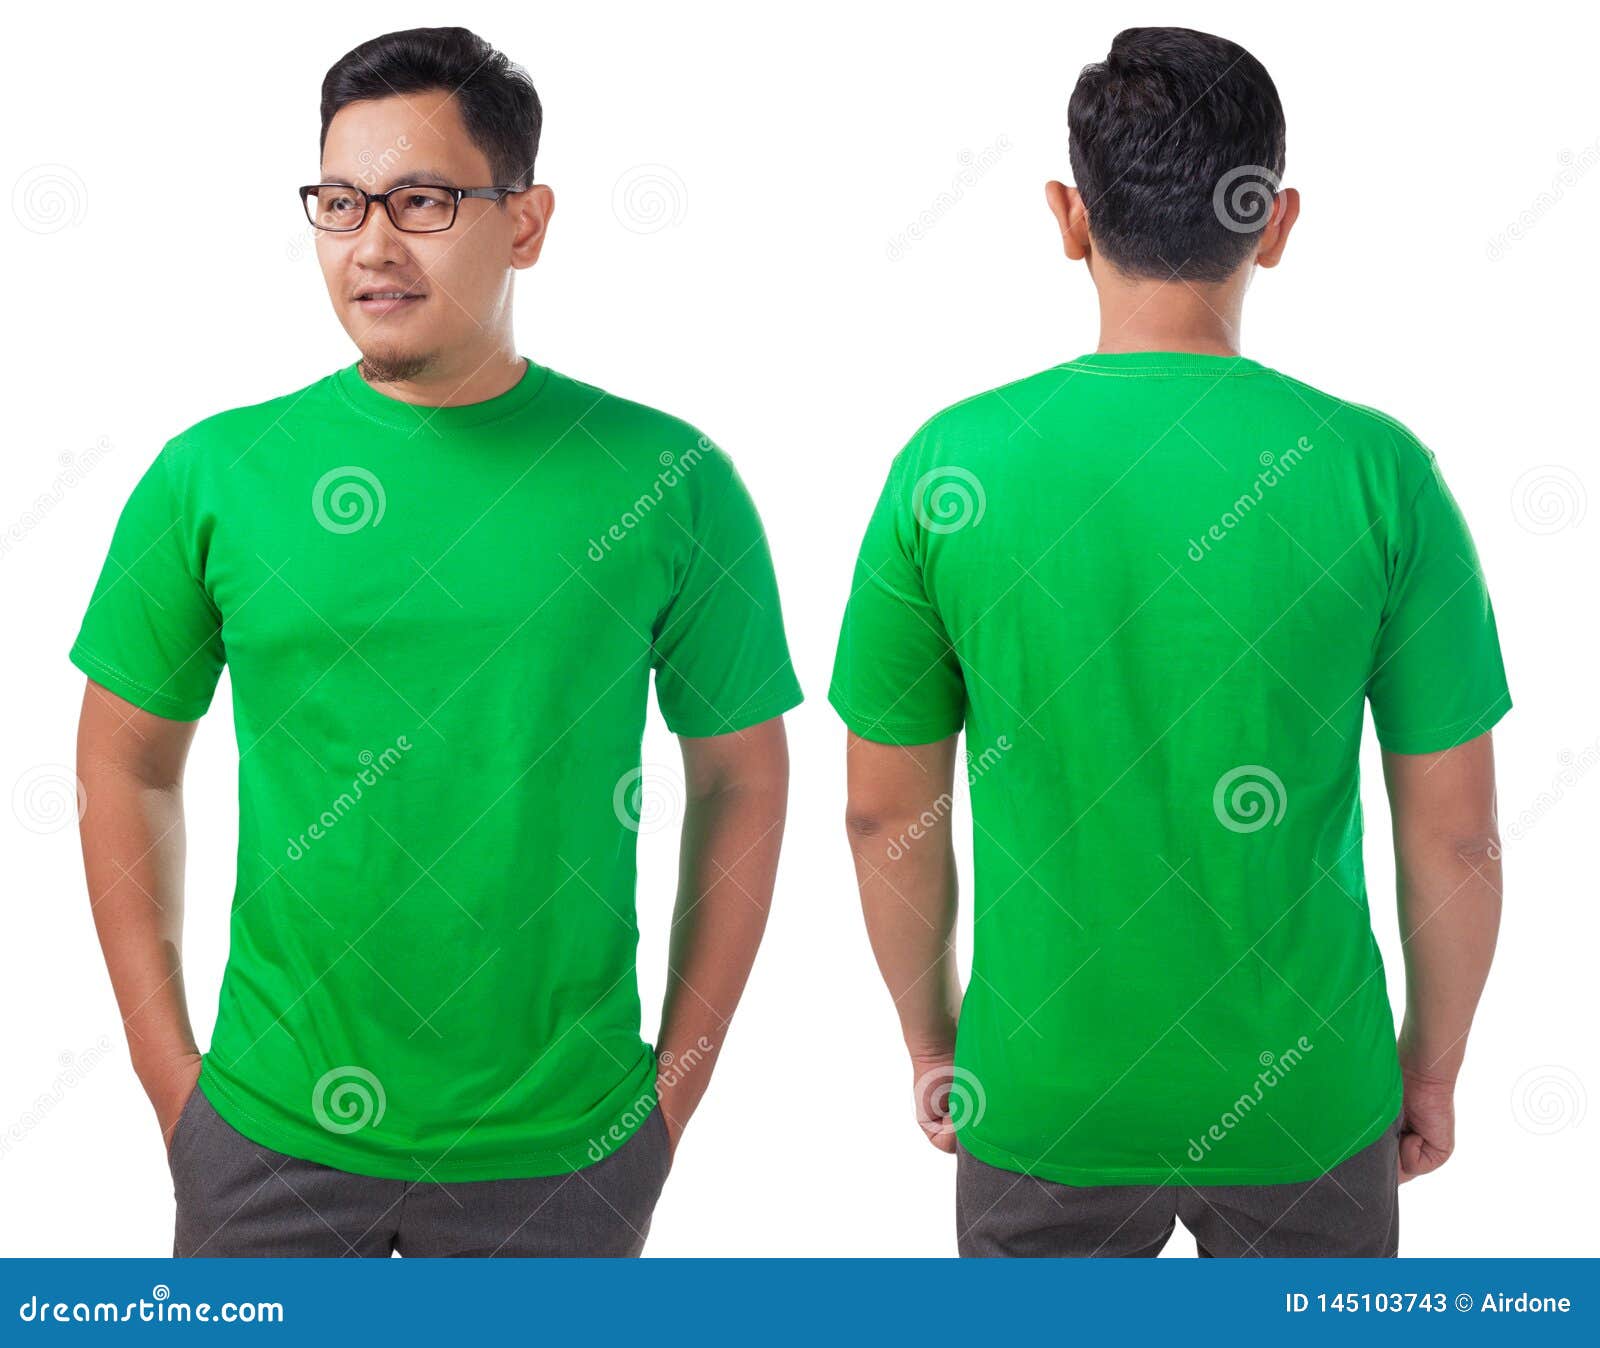 Green Shirt Design Template Stock Image - Image of male, fashion: 145103743